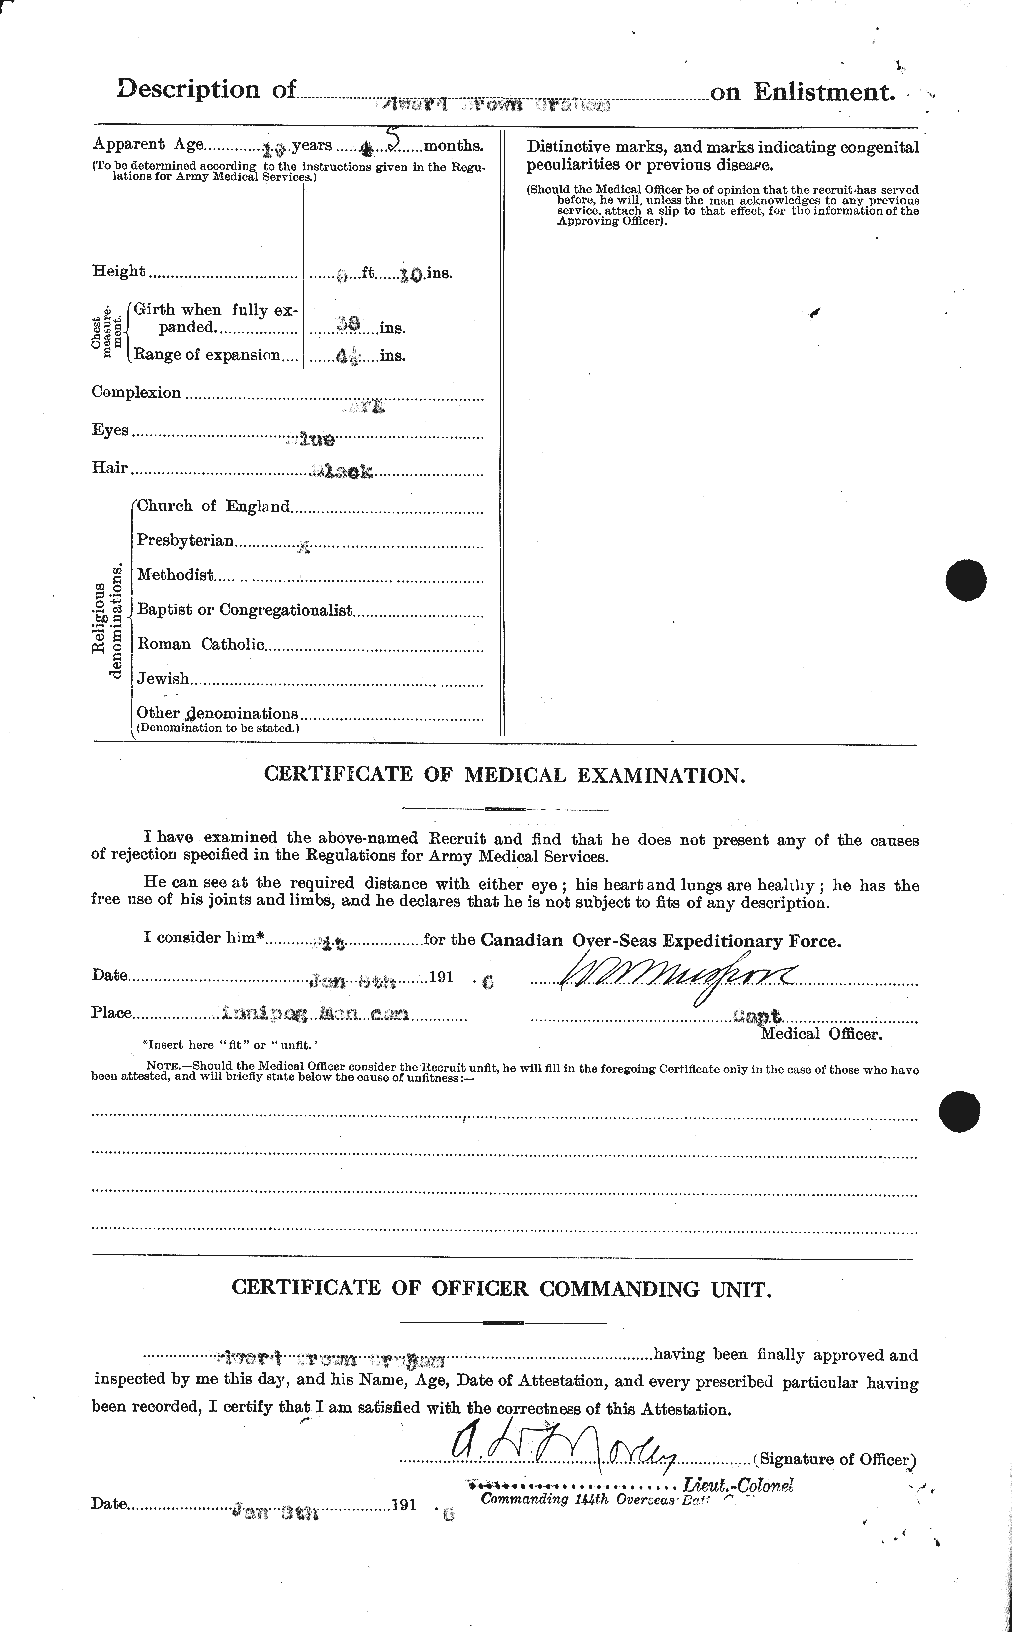 Personnel Records of the First World War - CEF 353867b